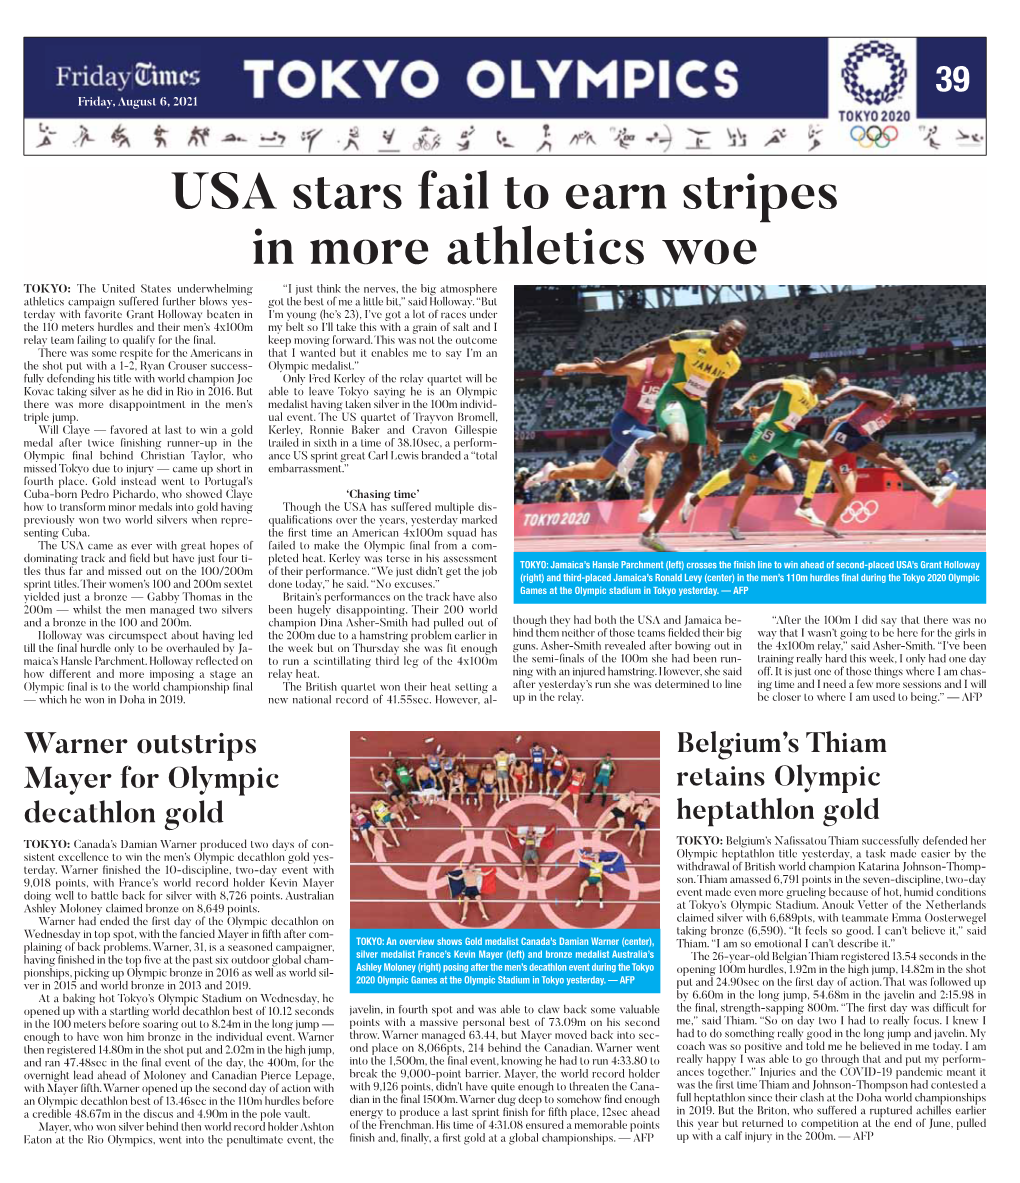 USA Stars Fail to Earn Stripes in More Athletics